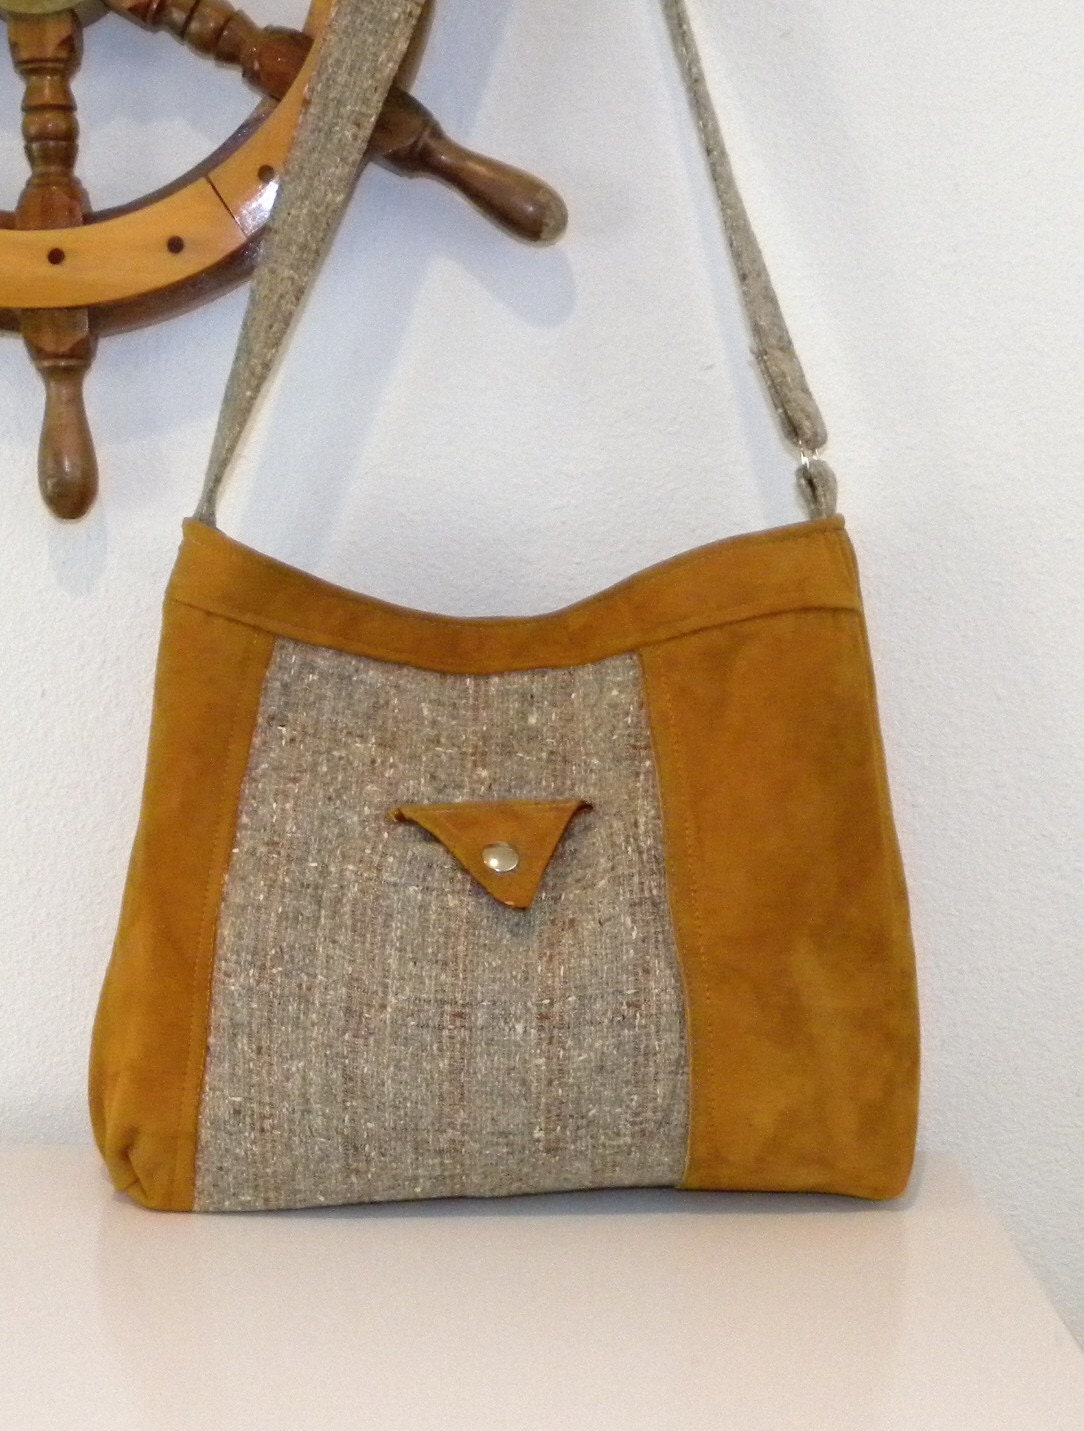 Handmade from a Golden Brown Leather Jacket and Plaid Tweed Coat - Handbag - Tote Bag - Purse